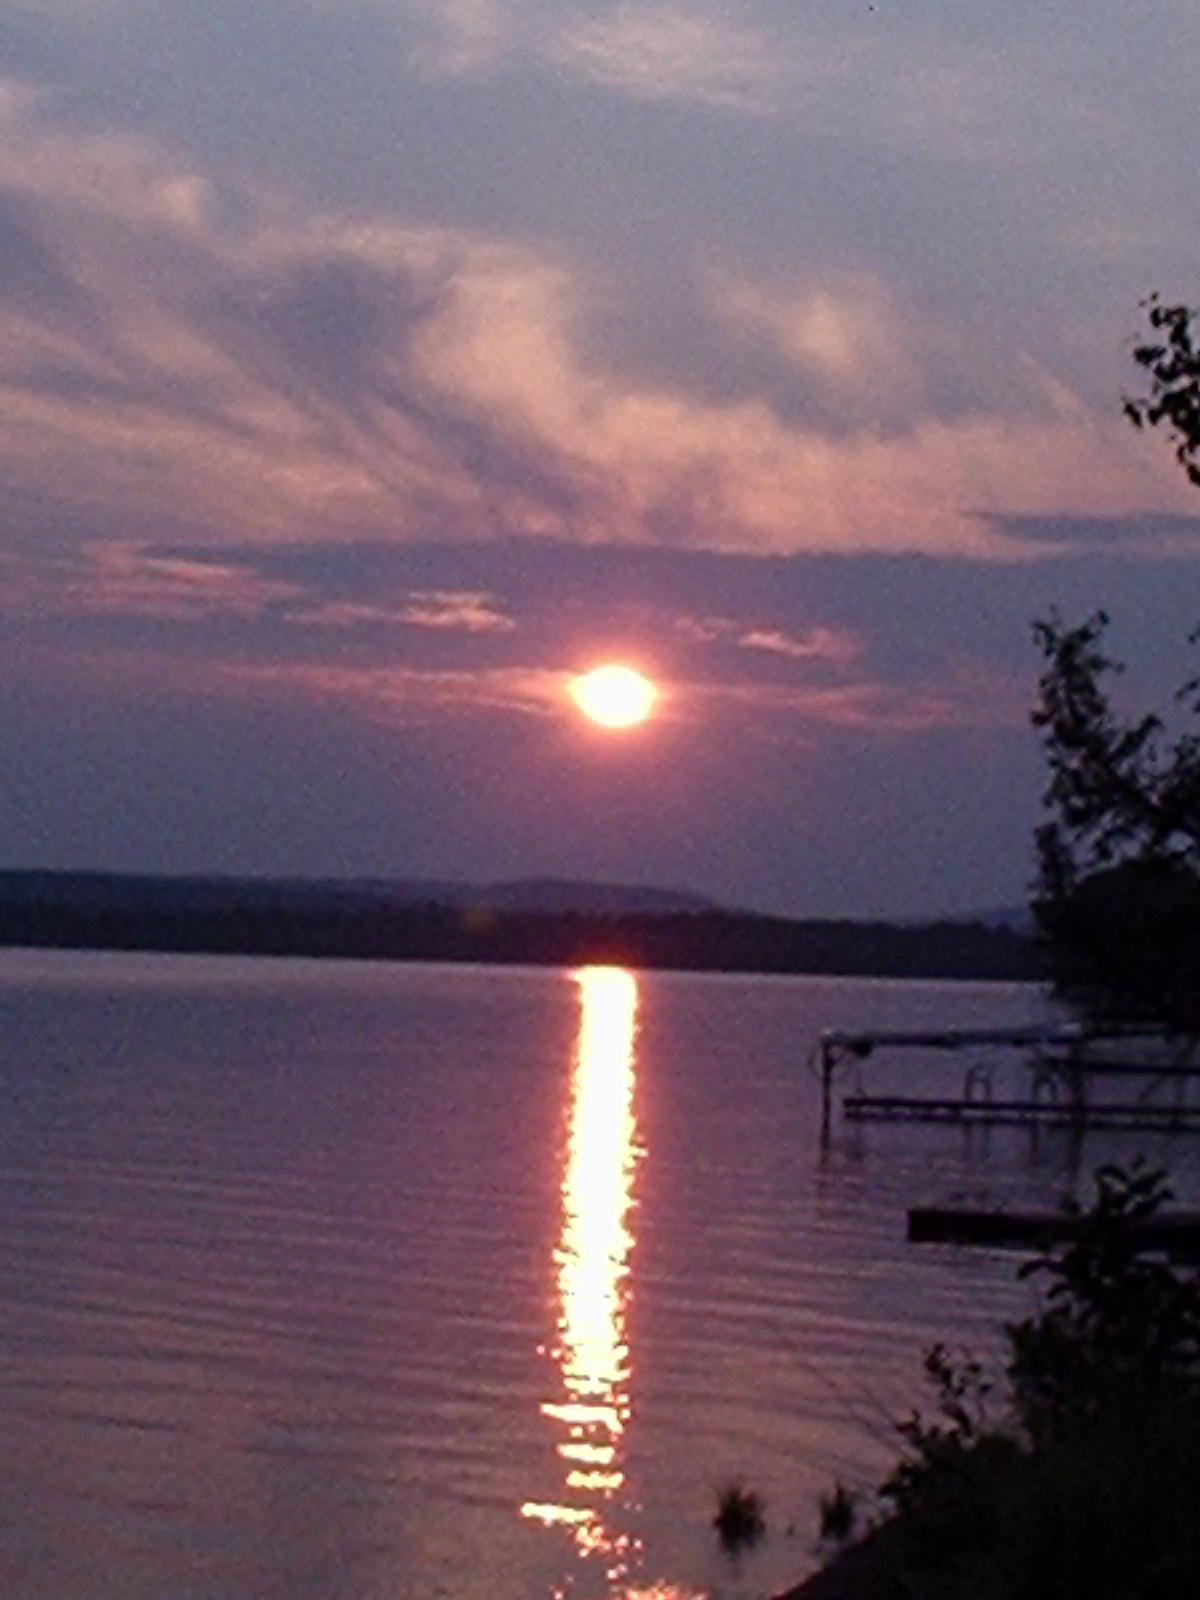 Sunset on Crosslake, ME (user submitted)